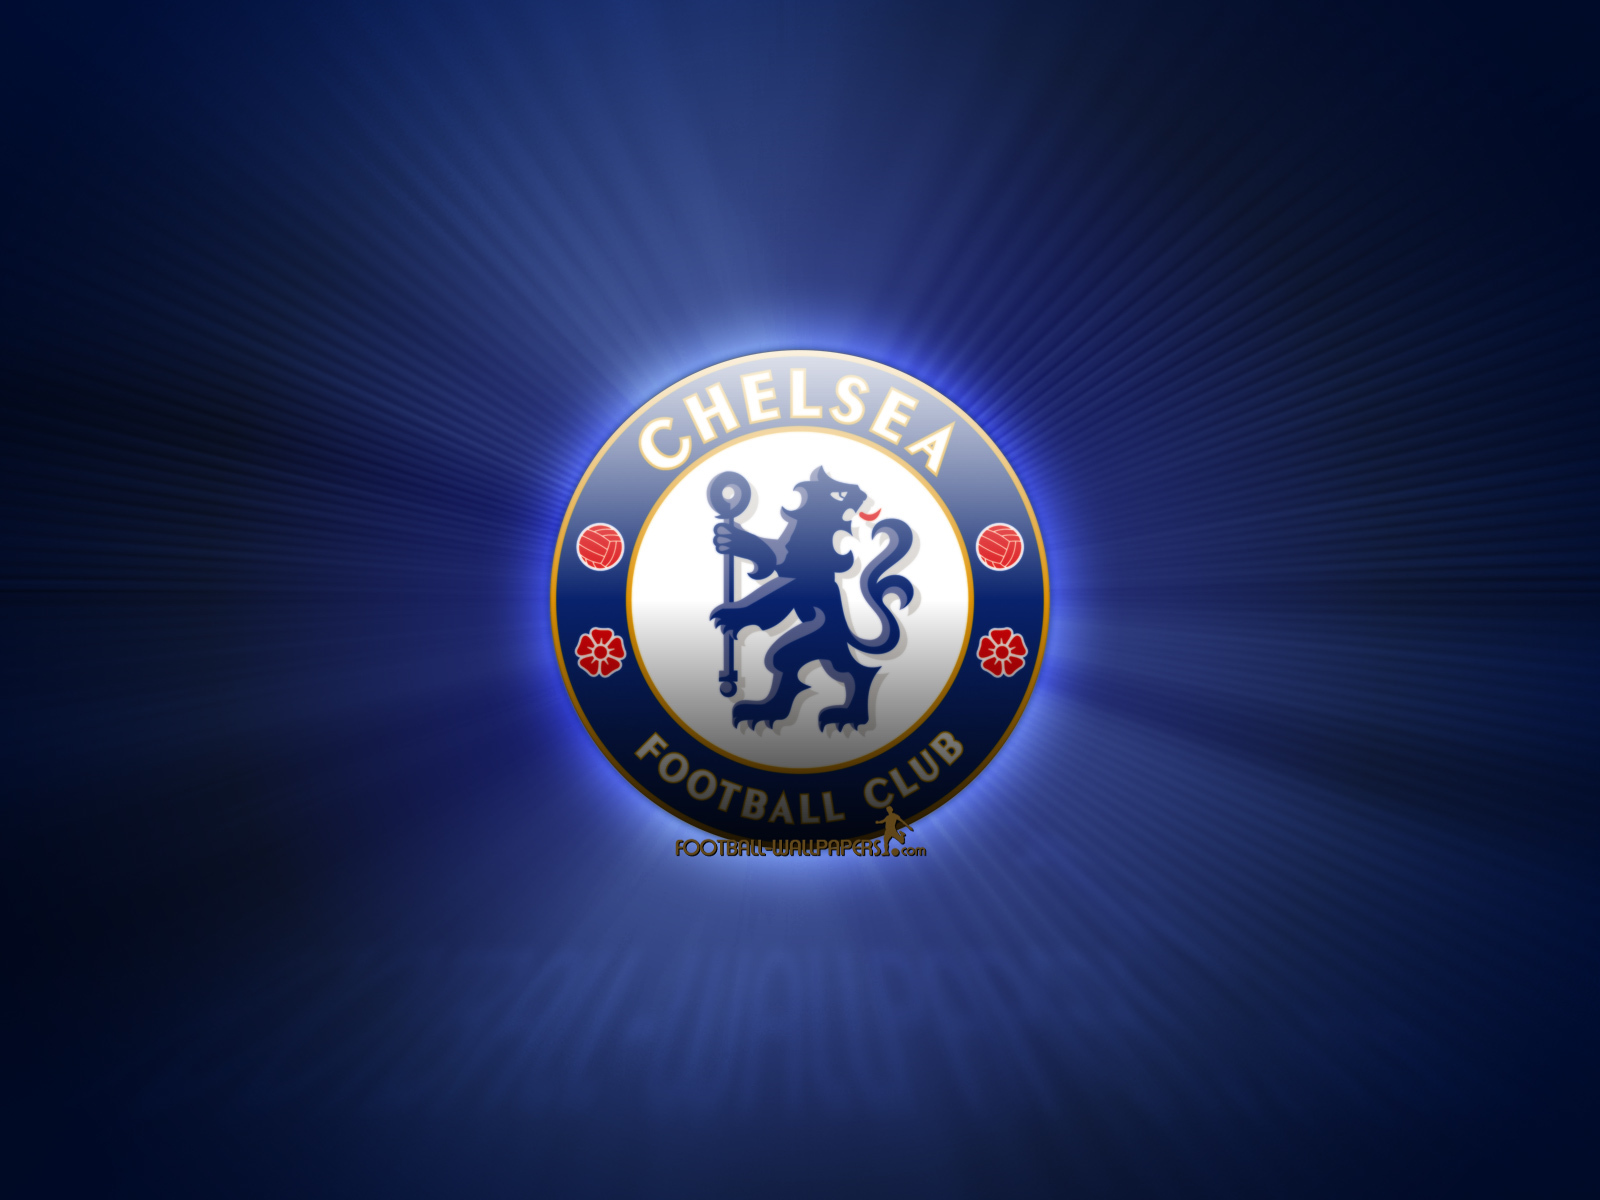 Download Chelsea wallpapers for mobile phone, free Chelsea HD pictures